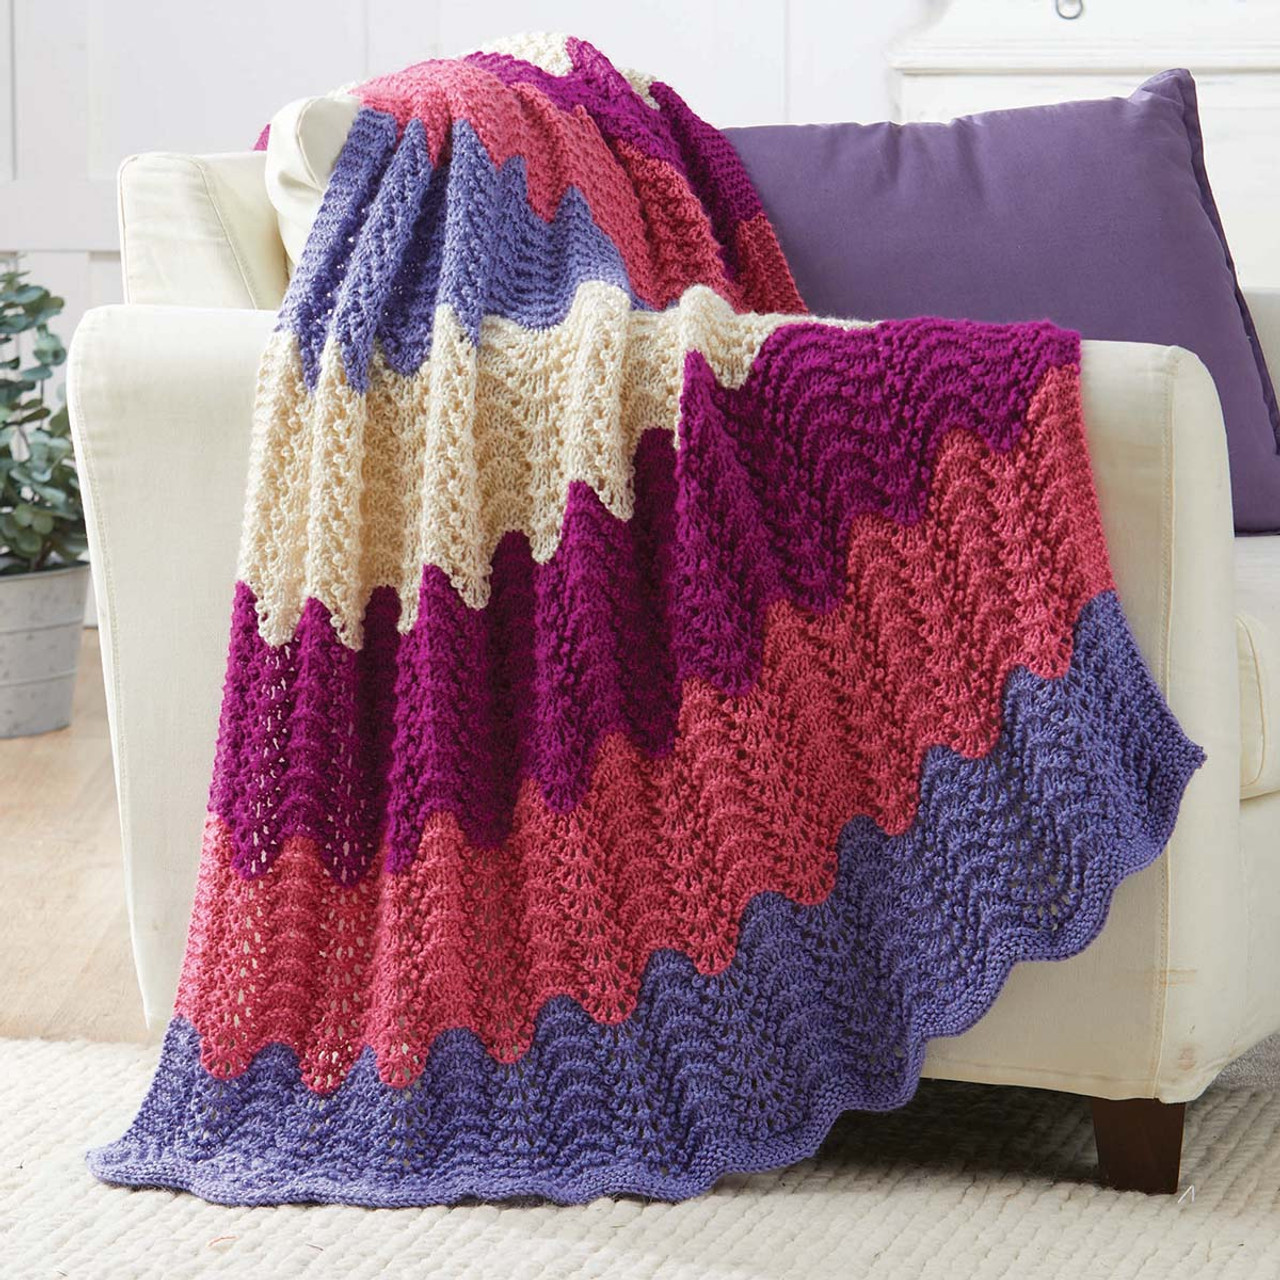 Willow Yarns Snow Currant Knit Rug Yarn Kit - Herrschners